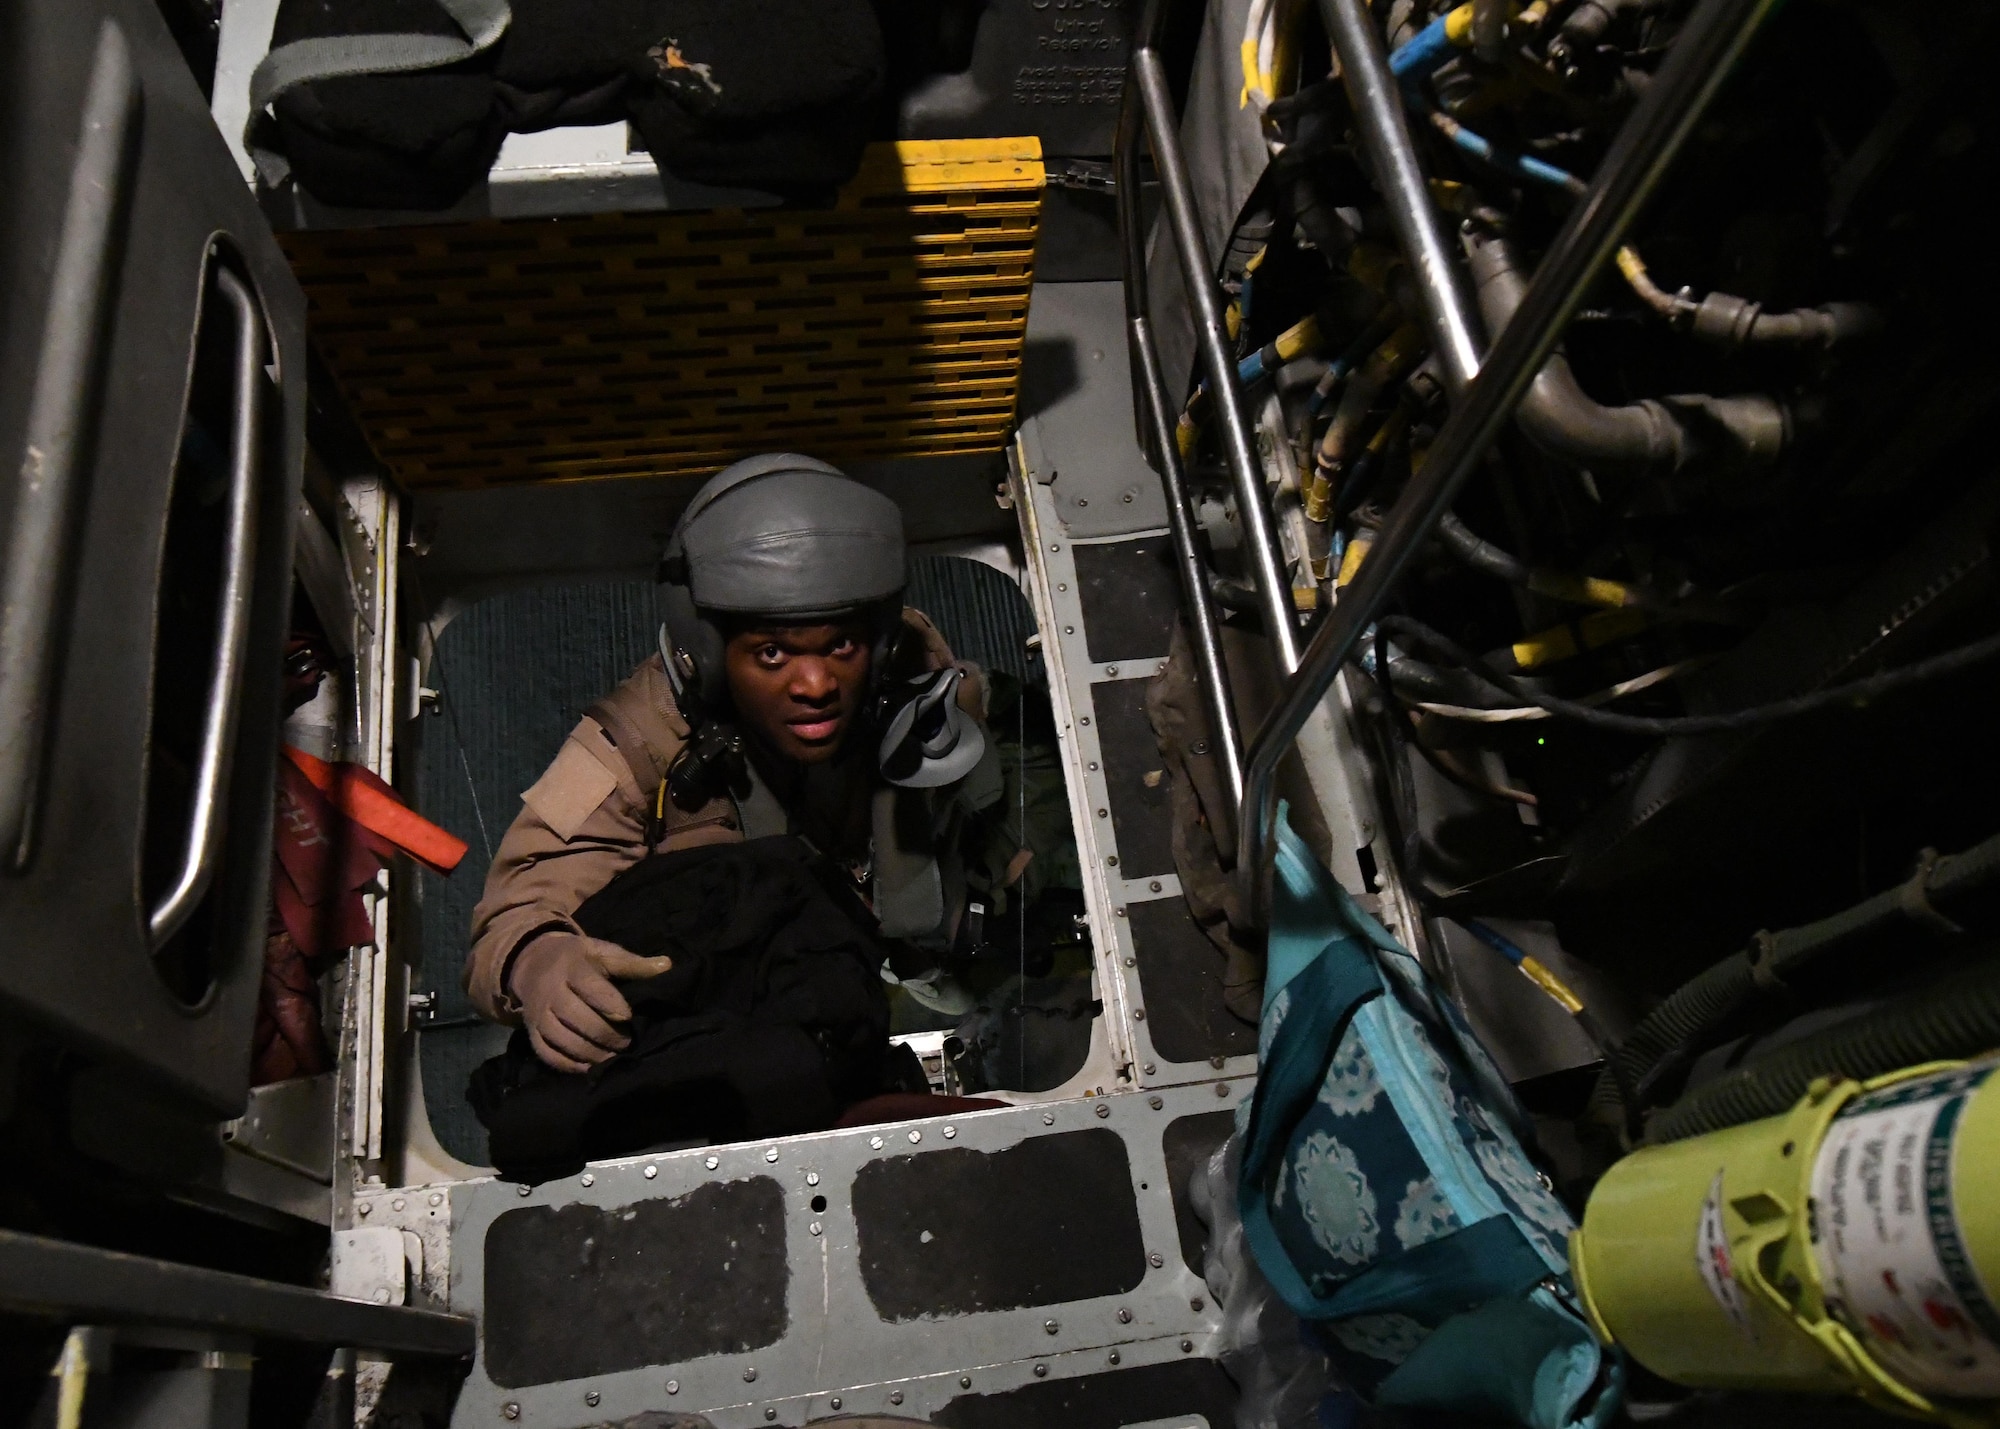 An aircrew member climbs into a B-52 Stratofortress prior to flight at an undisclosed location in Southwest Asia, Jan. 4, 2017. The B-52 is capable of flying at high subsonic speeds at altitudes up to 50,000 feet and can carry nuclear or precision guided conventional ordnance with worldwide precision navigation capability. (U.S. Air Force photo by Senior Airman Miles Wilson)